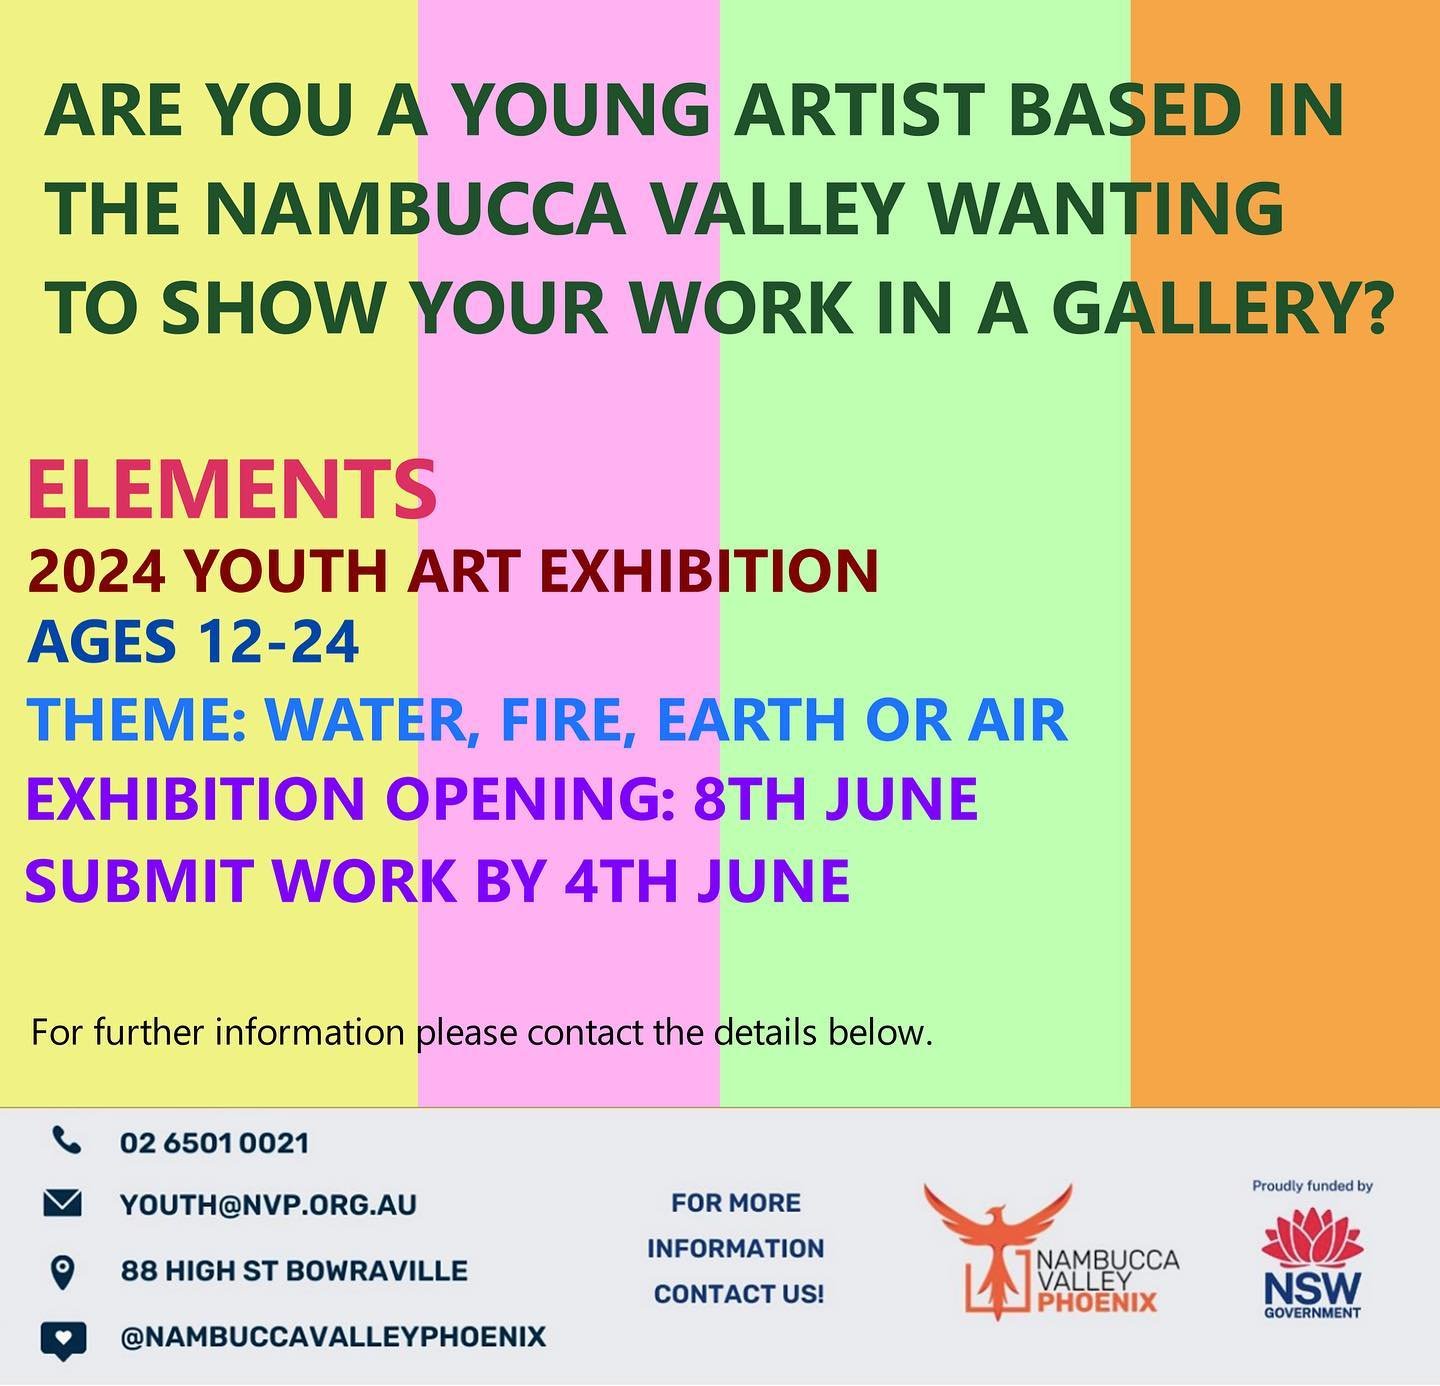 Are you a young artists from the Nambucca Valley wanting to show your work in a gallery? We have an upcoming opportunity at the Phoenix Gallery for people aged 12-24. All mediums are welcome and entry in FREE. 

The exhibition theme is Elements: Wate